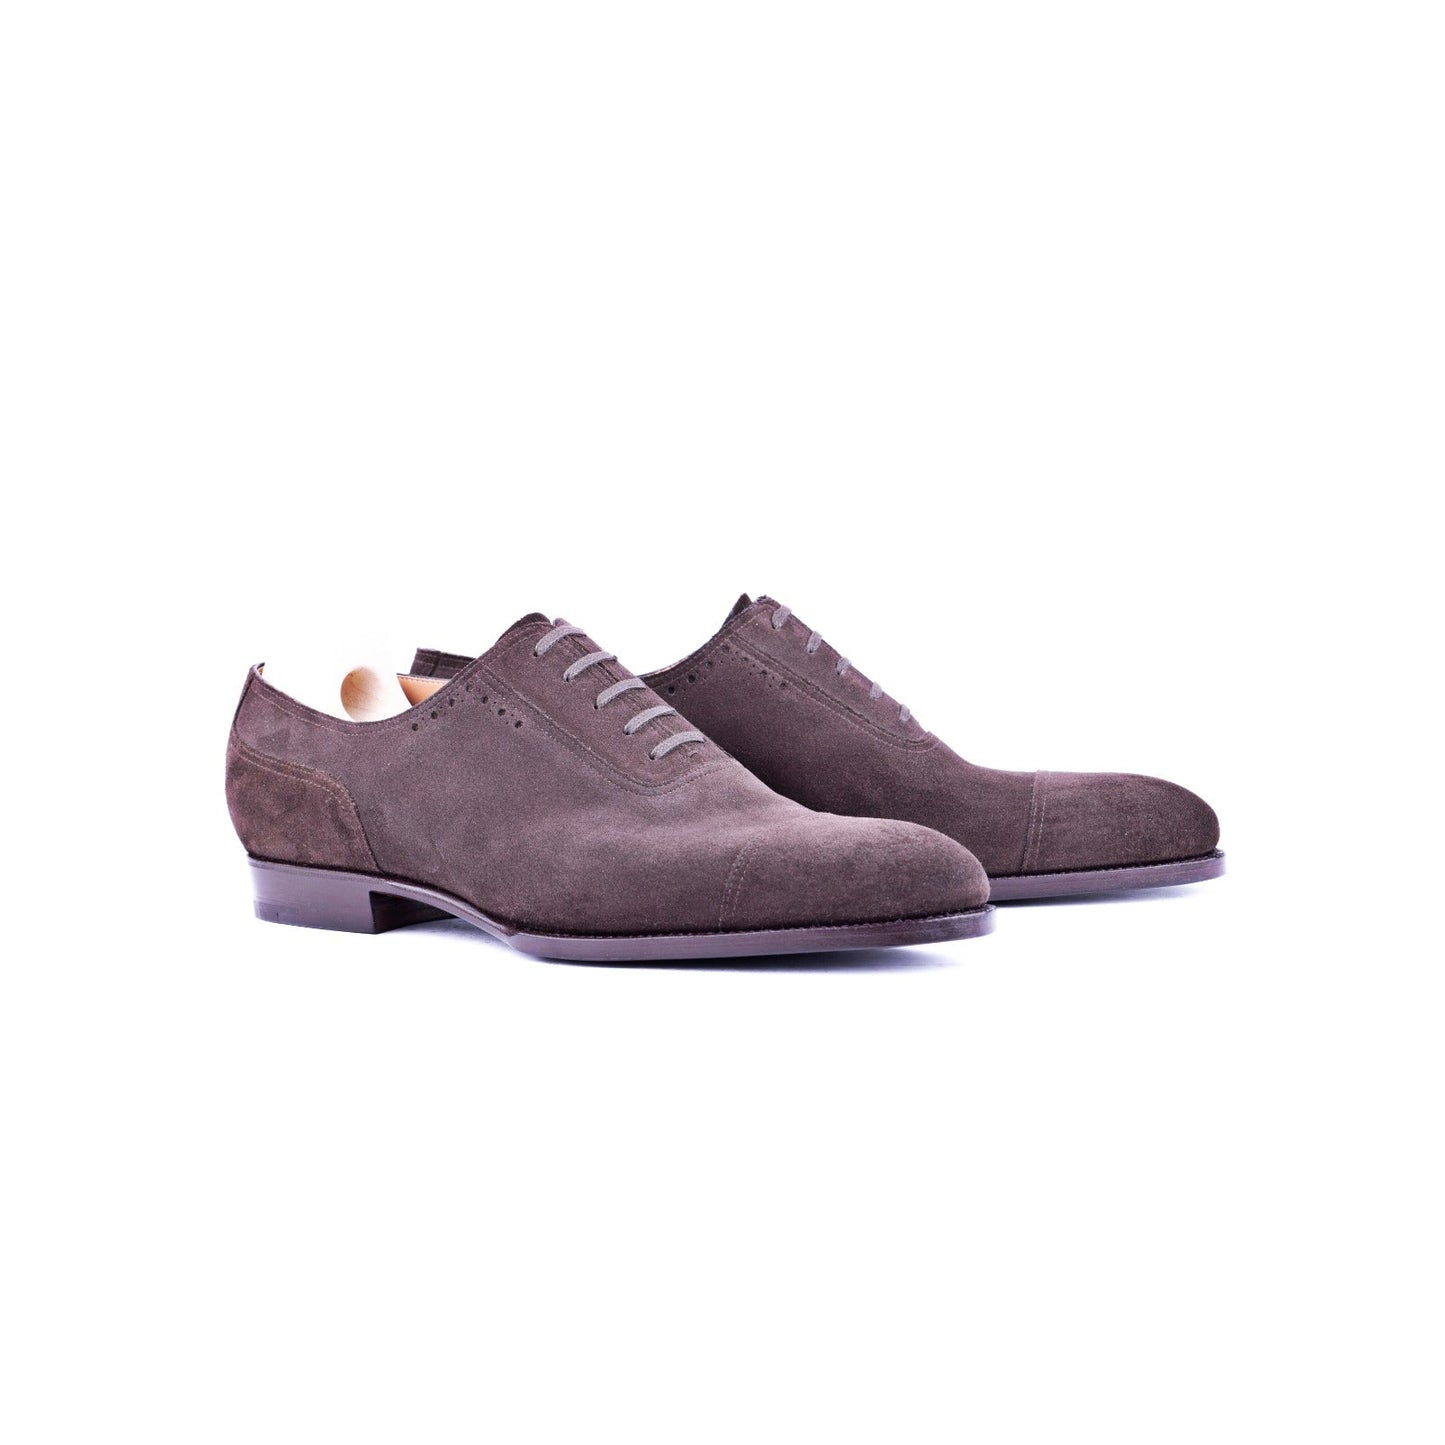 Oxford, plain sewn, straight toe box and sparingly perforated vamp